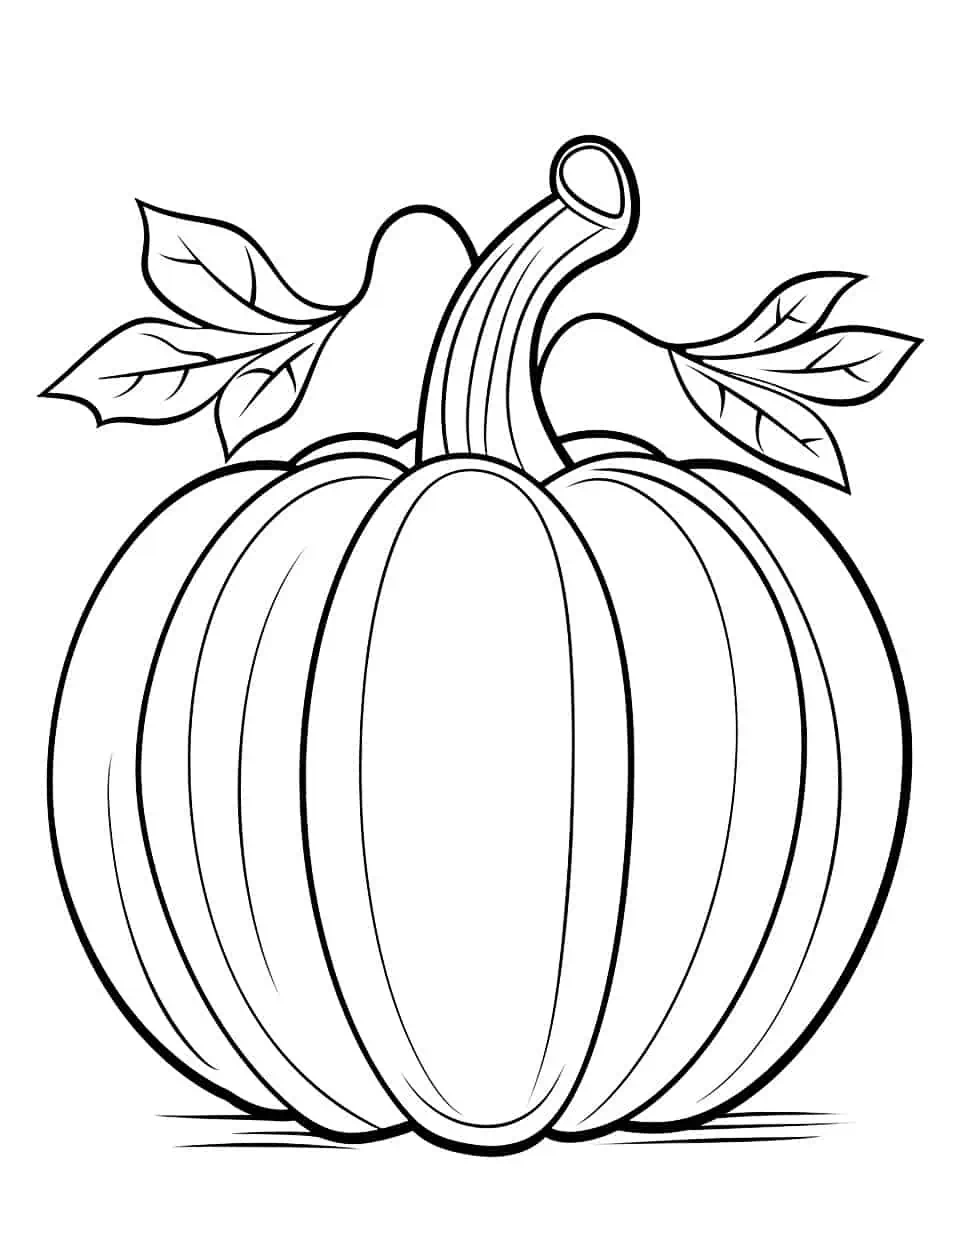 Easy Pumpkin Coloring Page - A coloring page featuring a large and easy-to-color pumpkin.